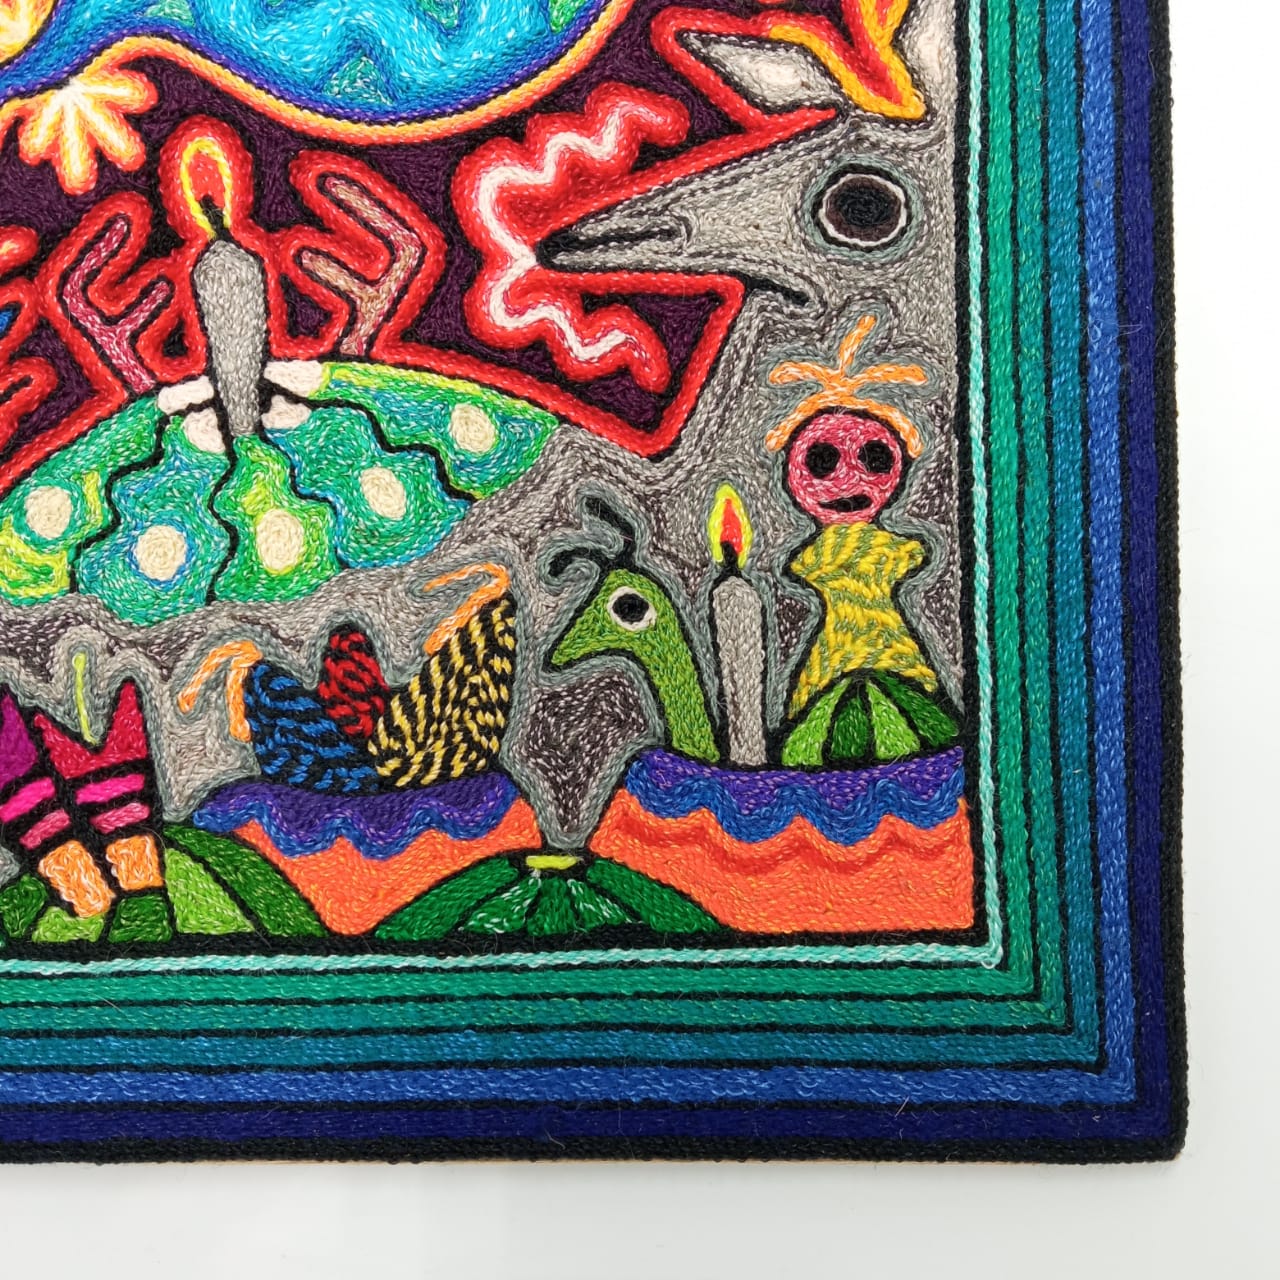 Paint Yarn  huichol Indian Yarn, Painting by Luis Castro PP6791